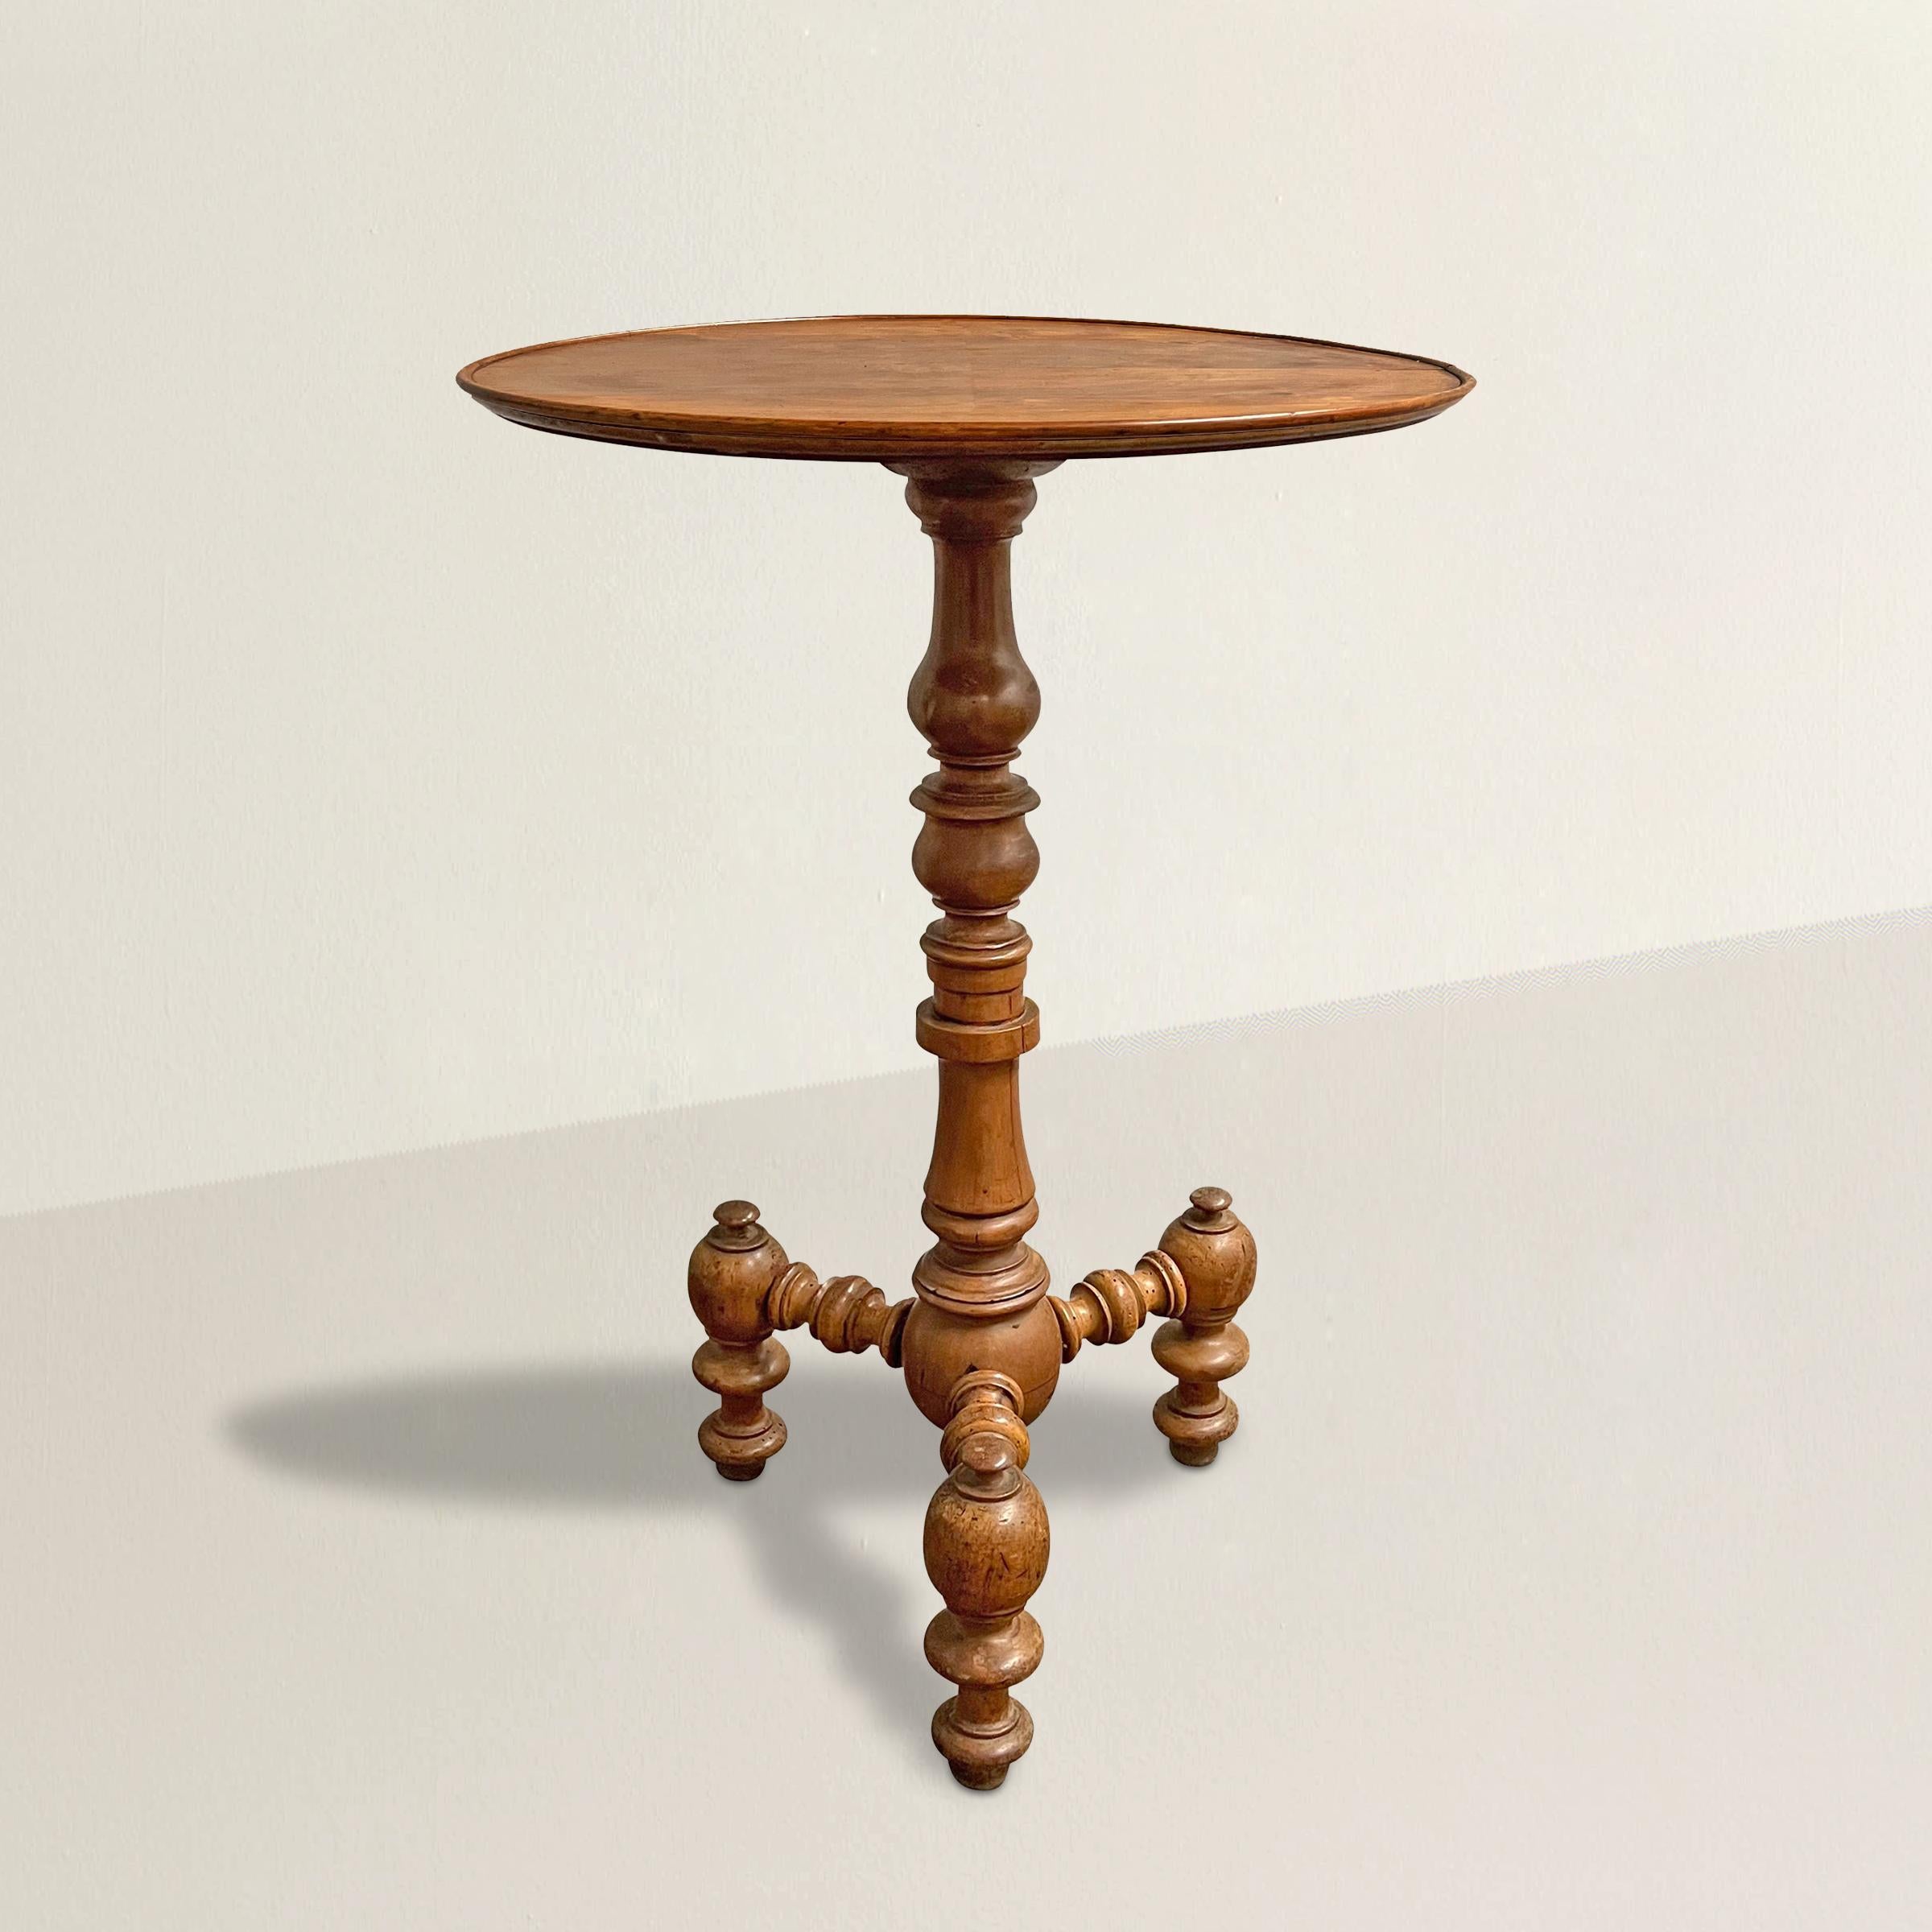 Experience the timeless beauty and charm of this late 18th-century French Provincial hand-carved fruitwood side table. Crafted with meticulous artistry, this exquisite piece is a testament to the skilled hands of its creators. The ornately turned